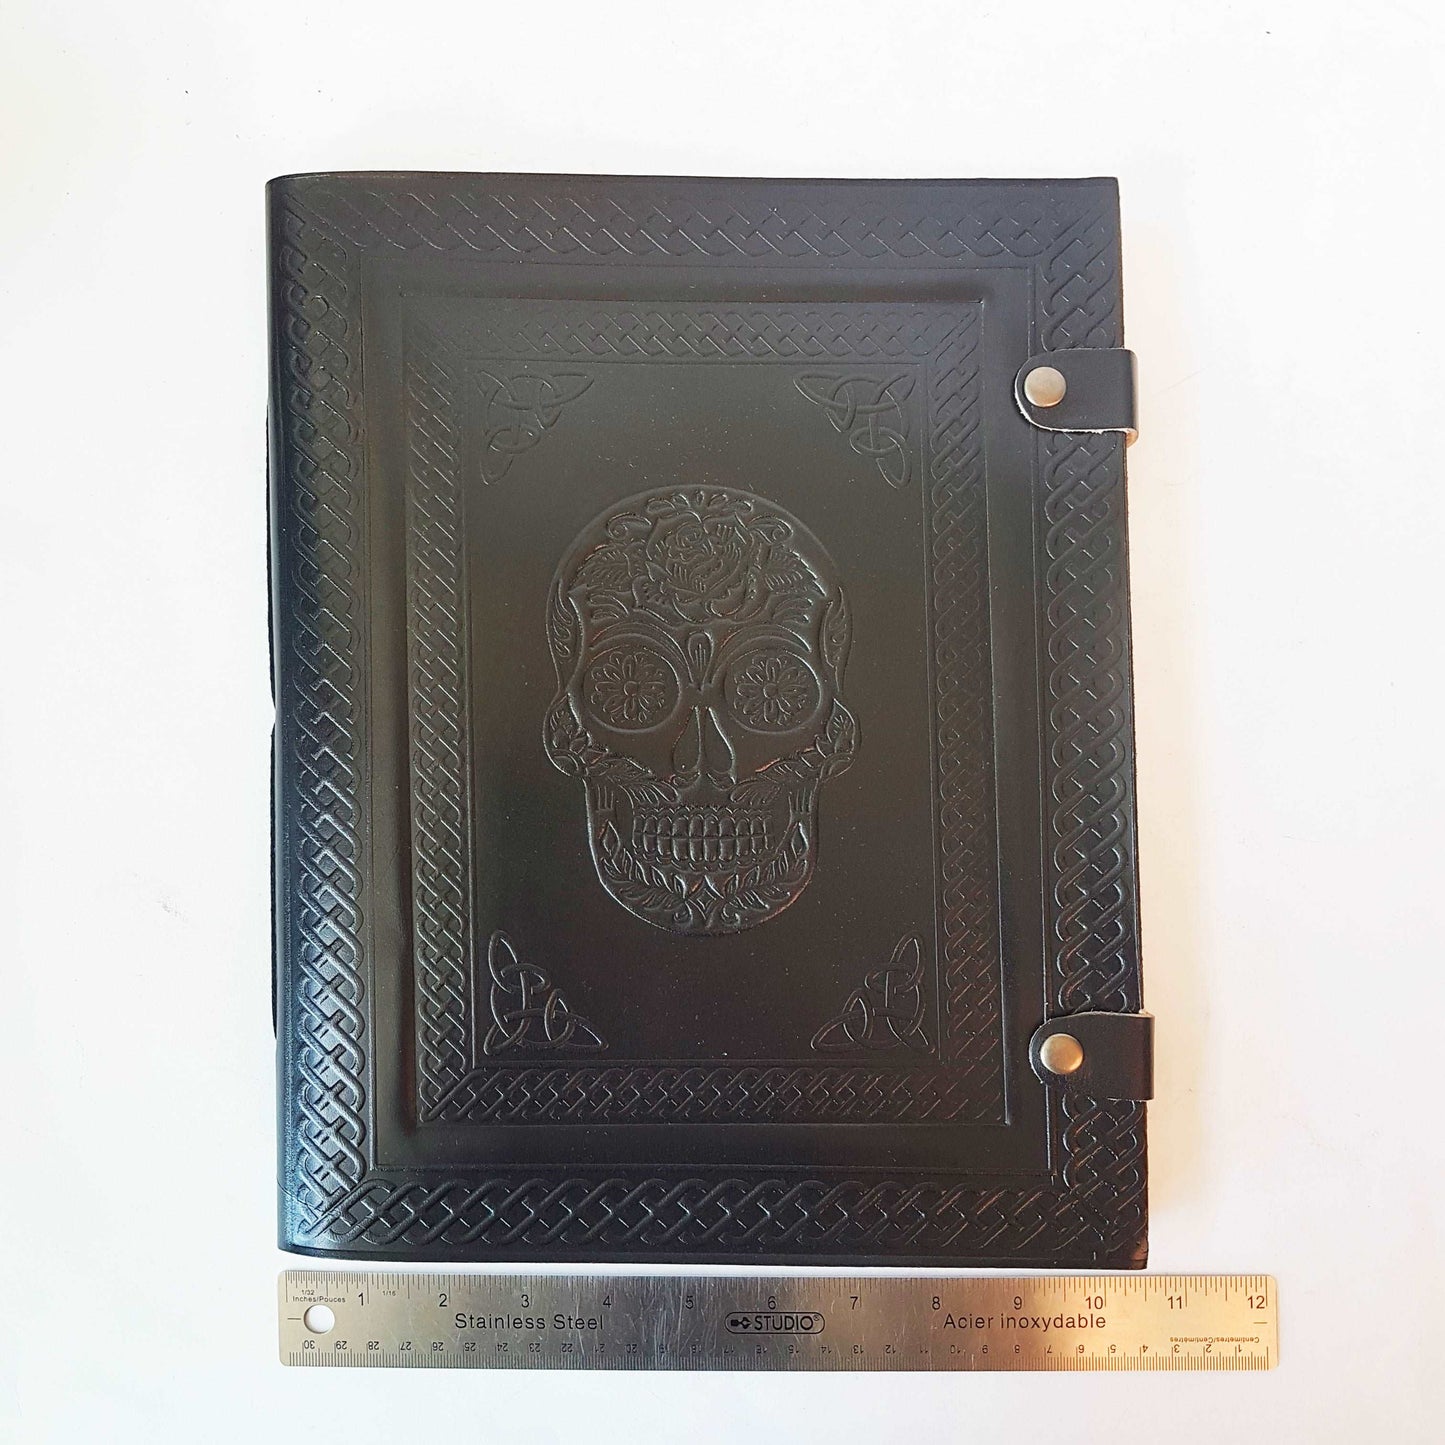 Black leather skull journal. Large album with blank pages. Use as sketchbook, diary, book of shadows. Halloween-wiccan-pagan theme gift.